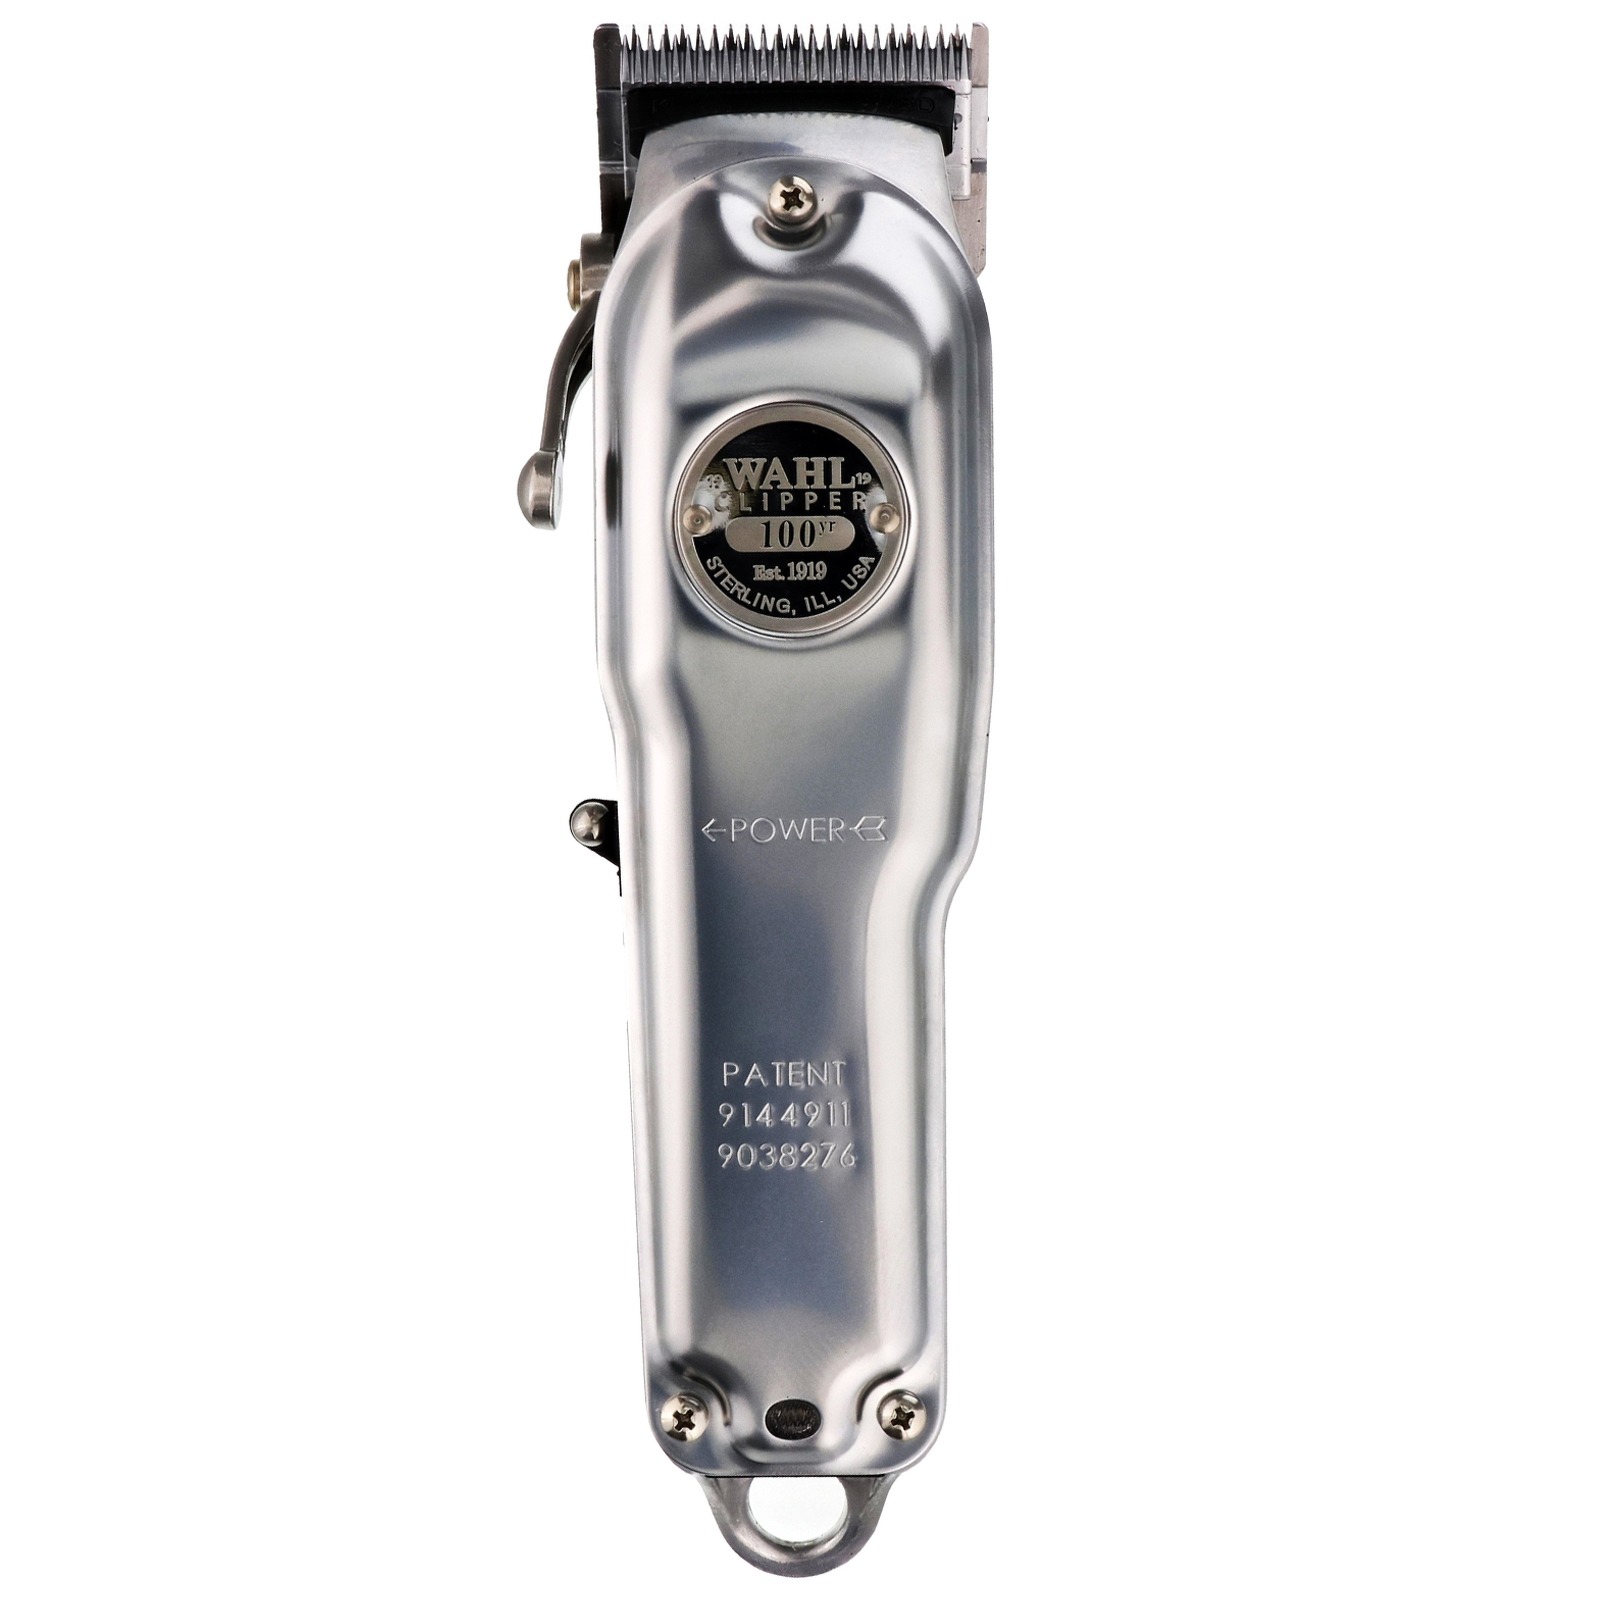 wahl 100 year anniversary clipper